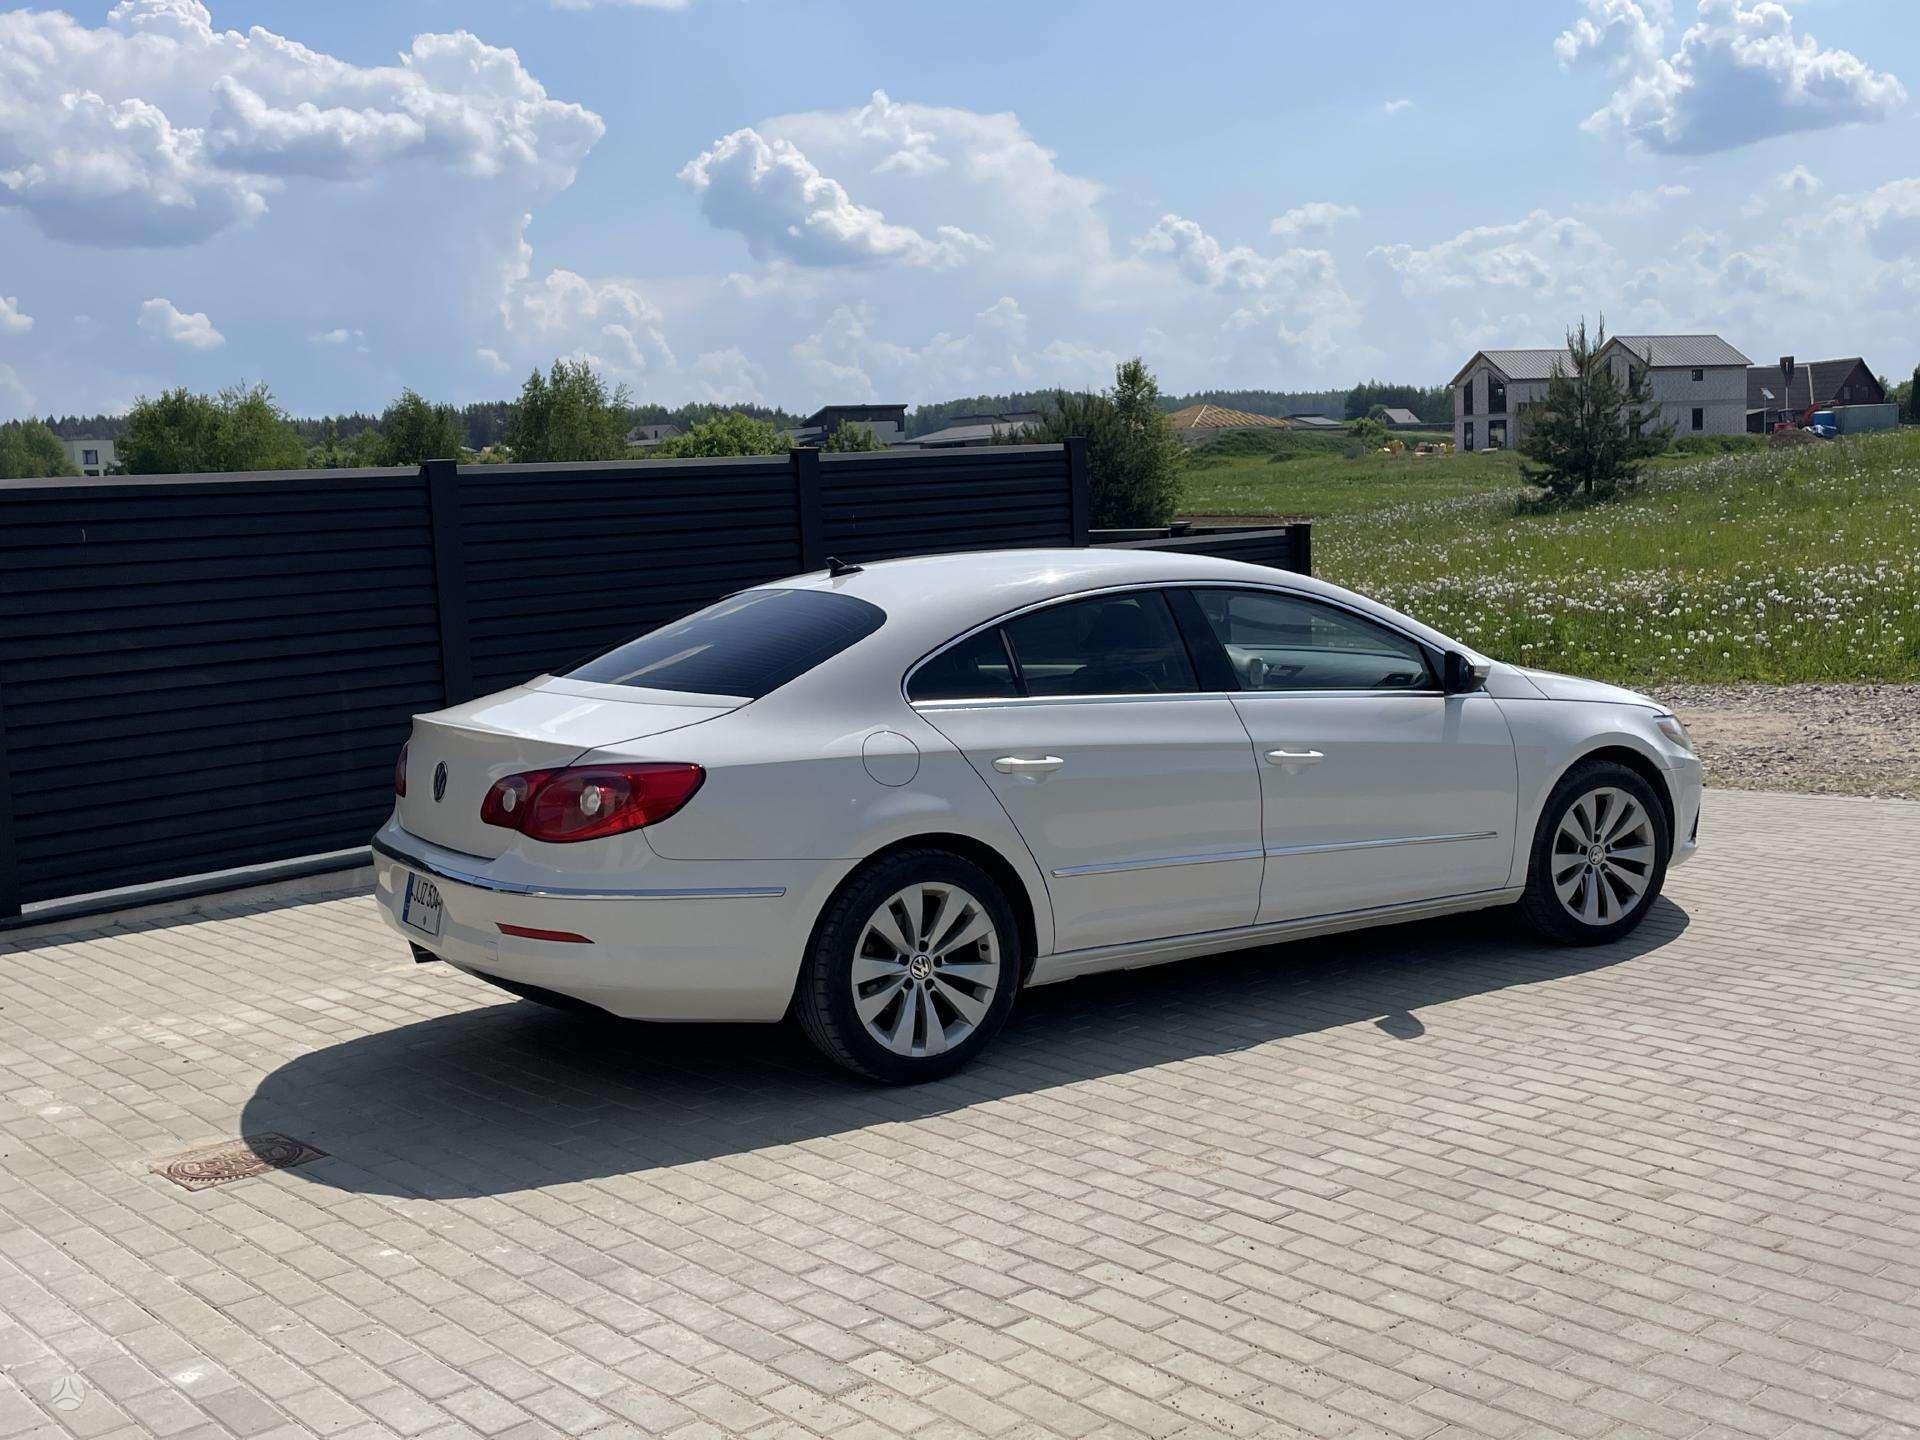 Volkswagen CC, 2.0 l., coupe  I shipped the car - 1